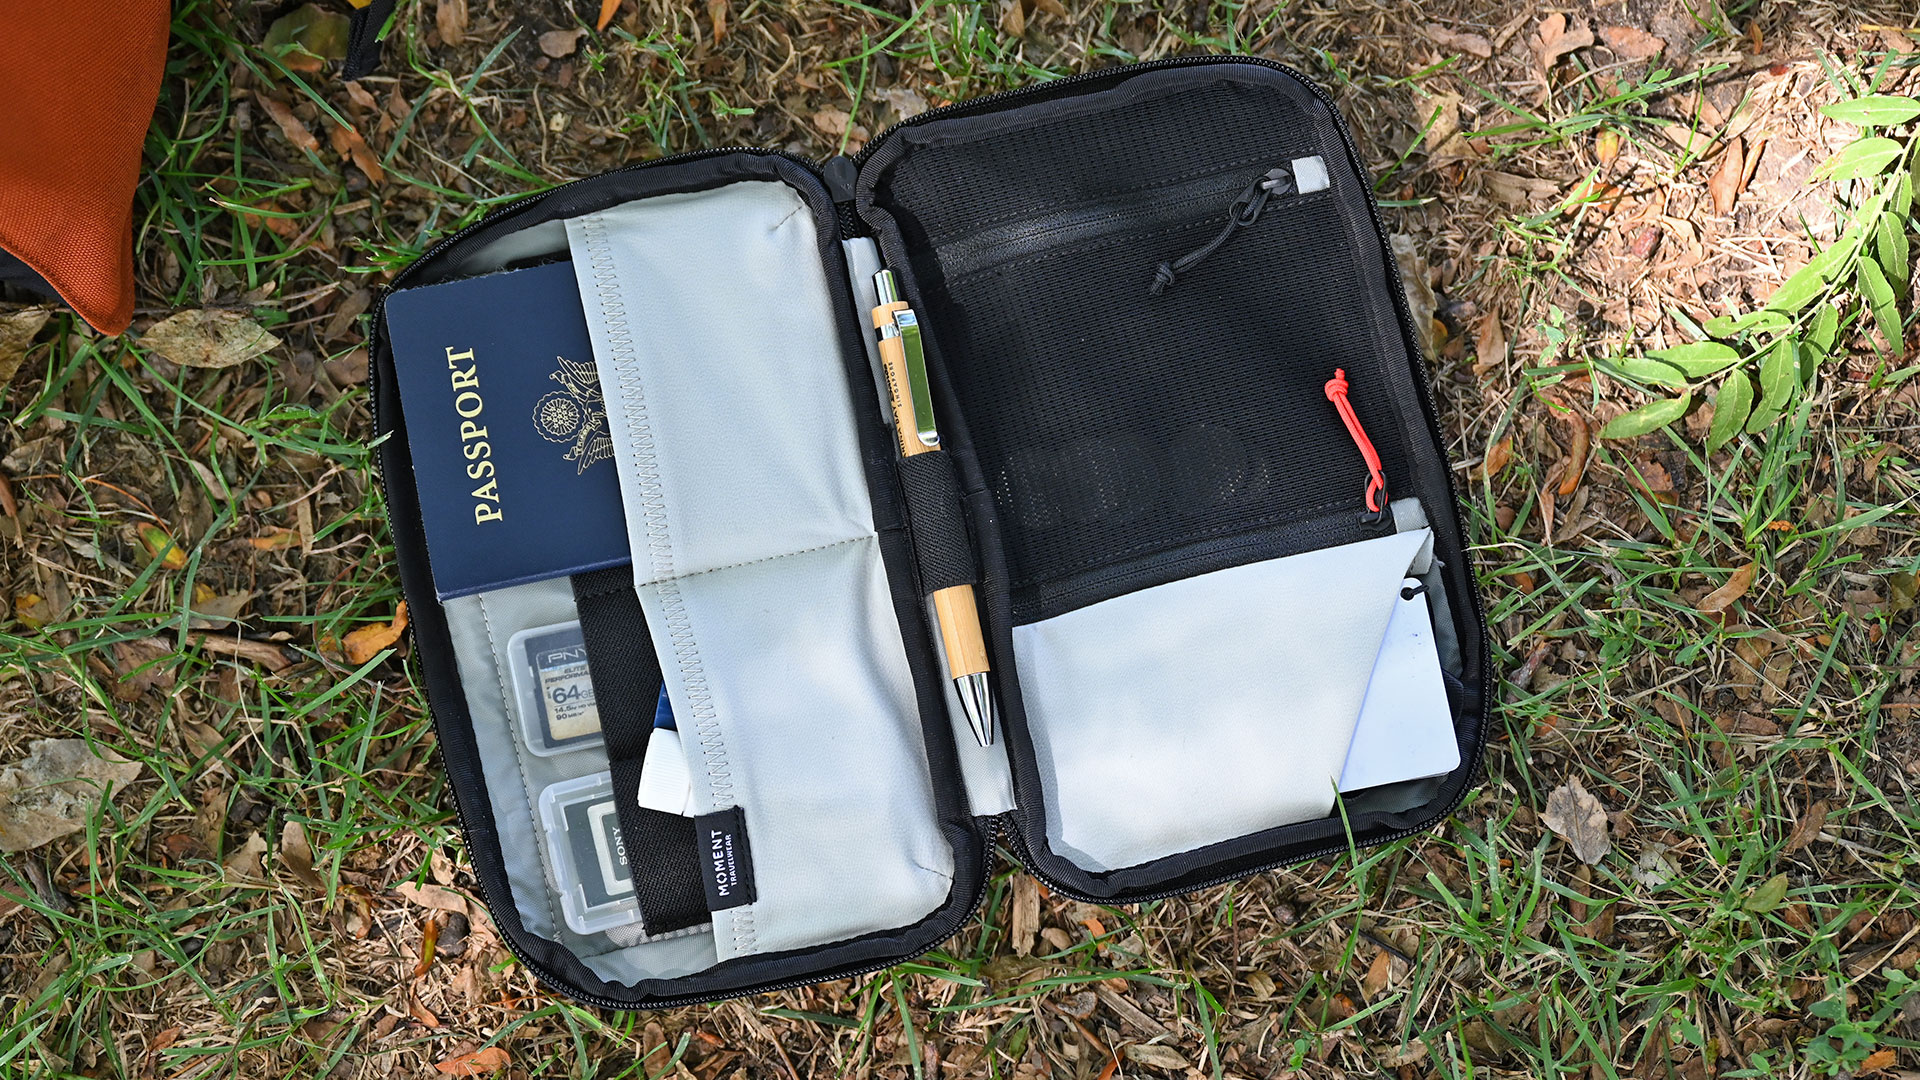 When it comes to travel organisation, I really like have a smaller removable bag or pouch for holding important items like passports, memory cards, and extra money.  (Photo: Sam Rutherford/Gizmodo)